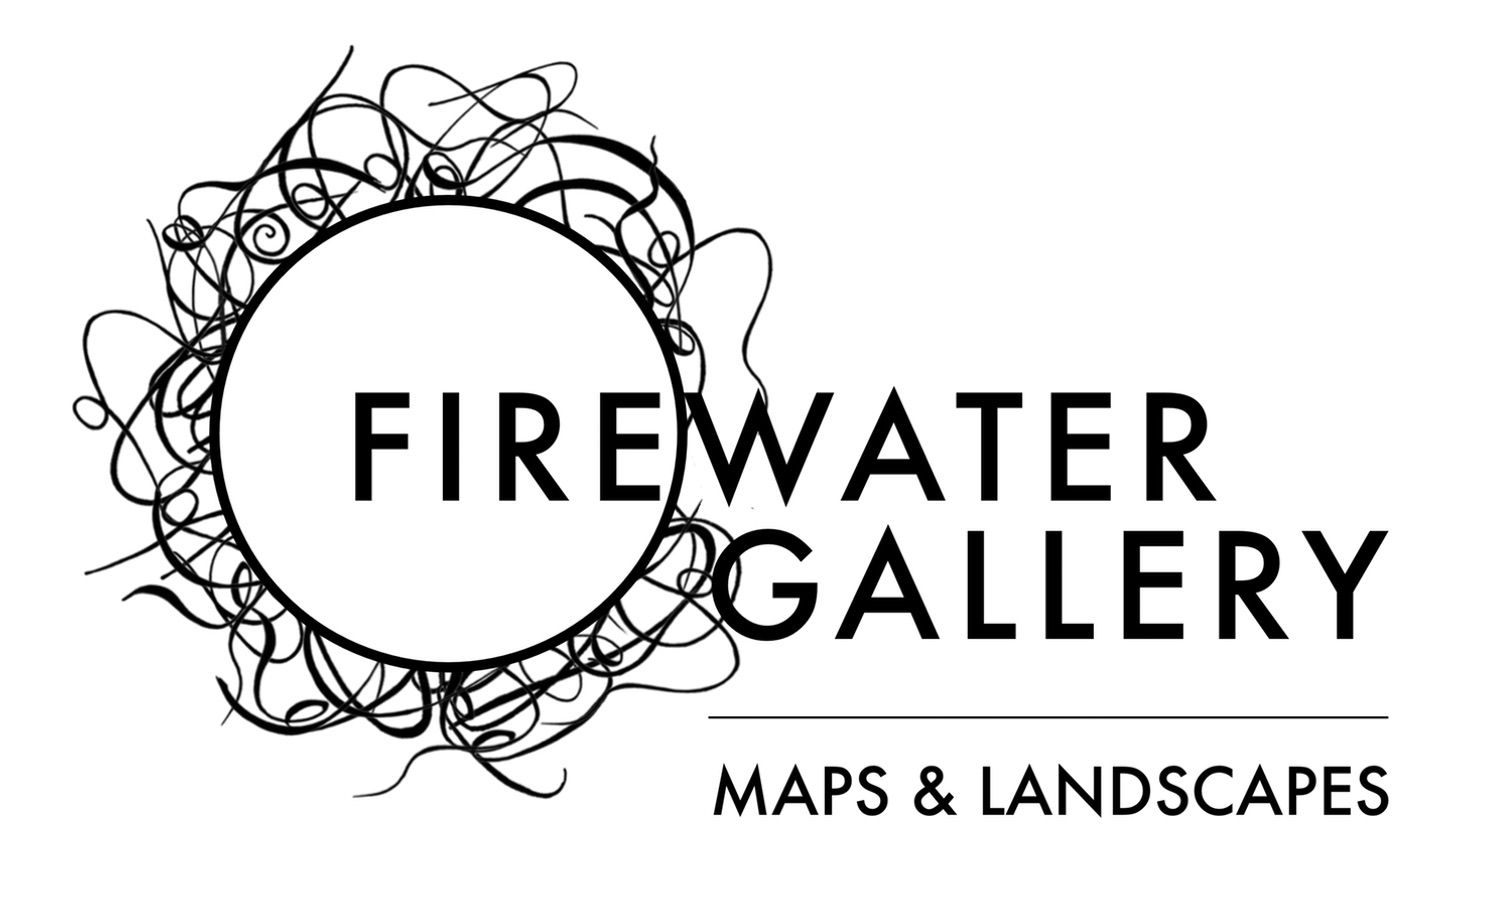 Firewater Gallery